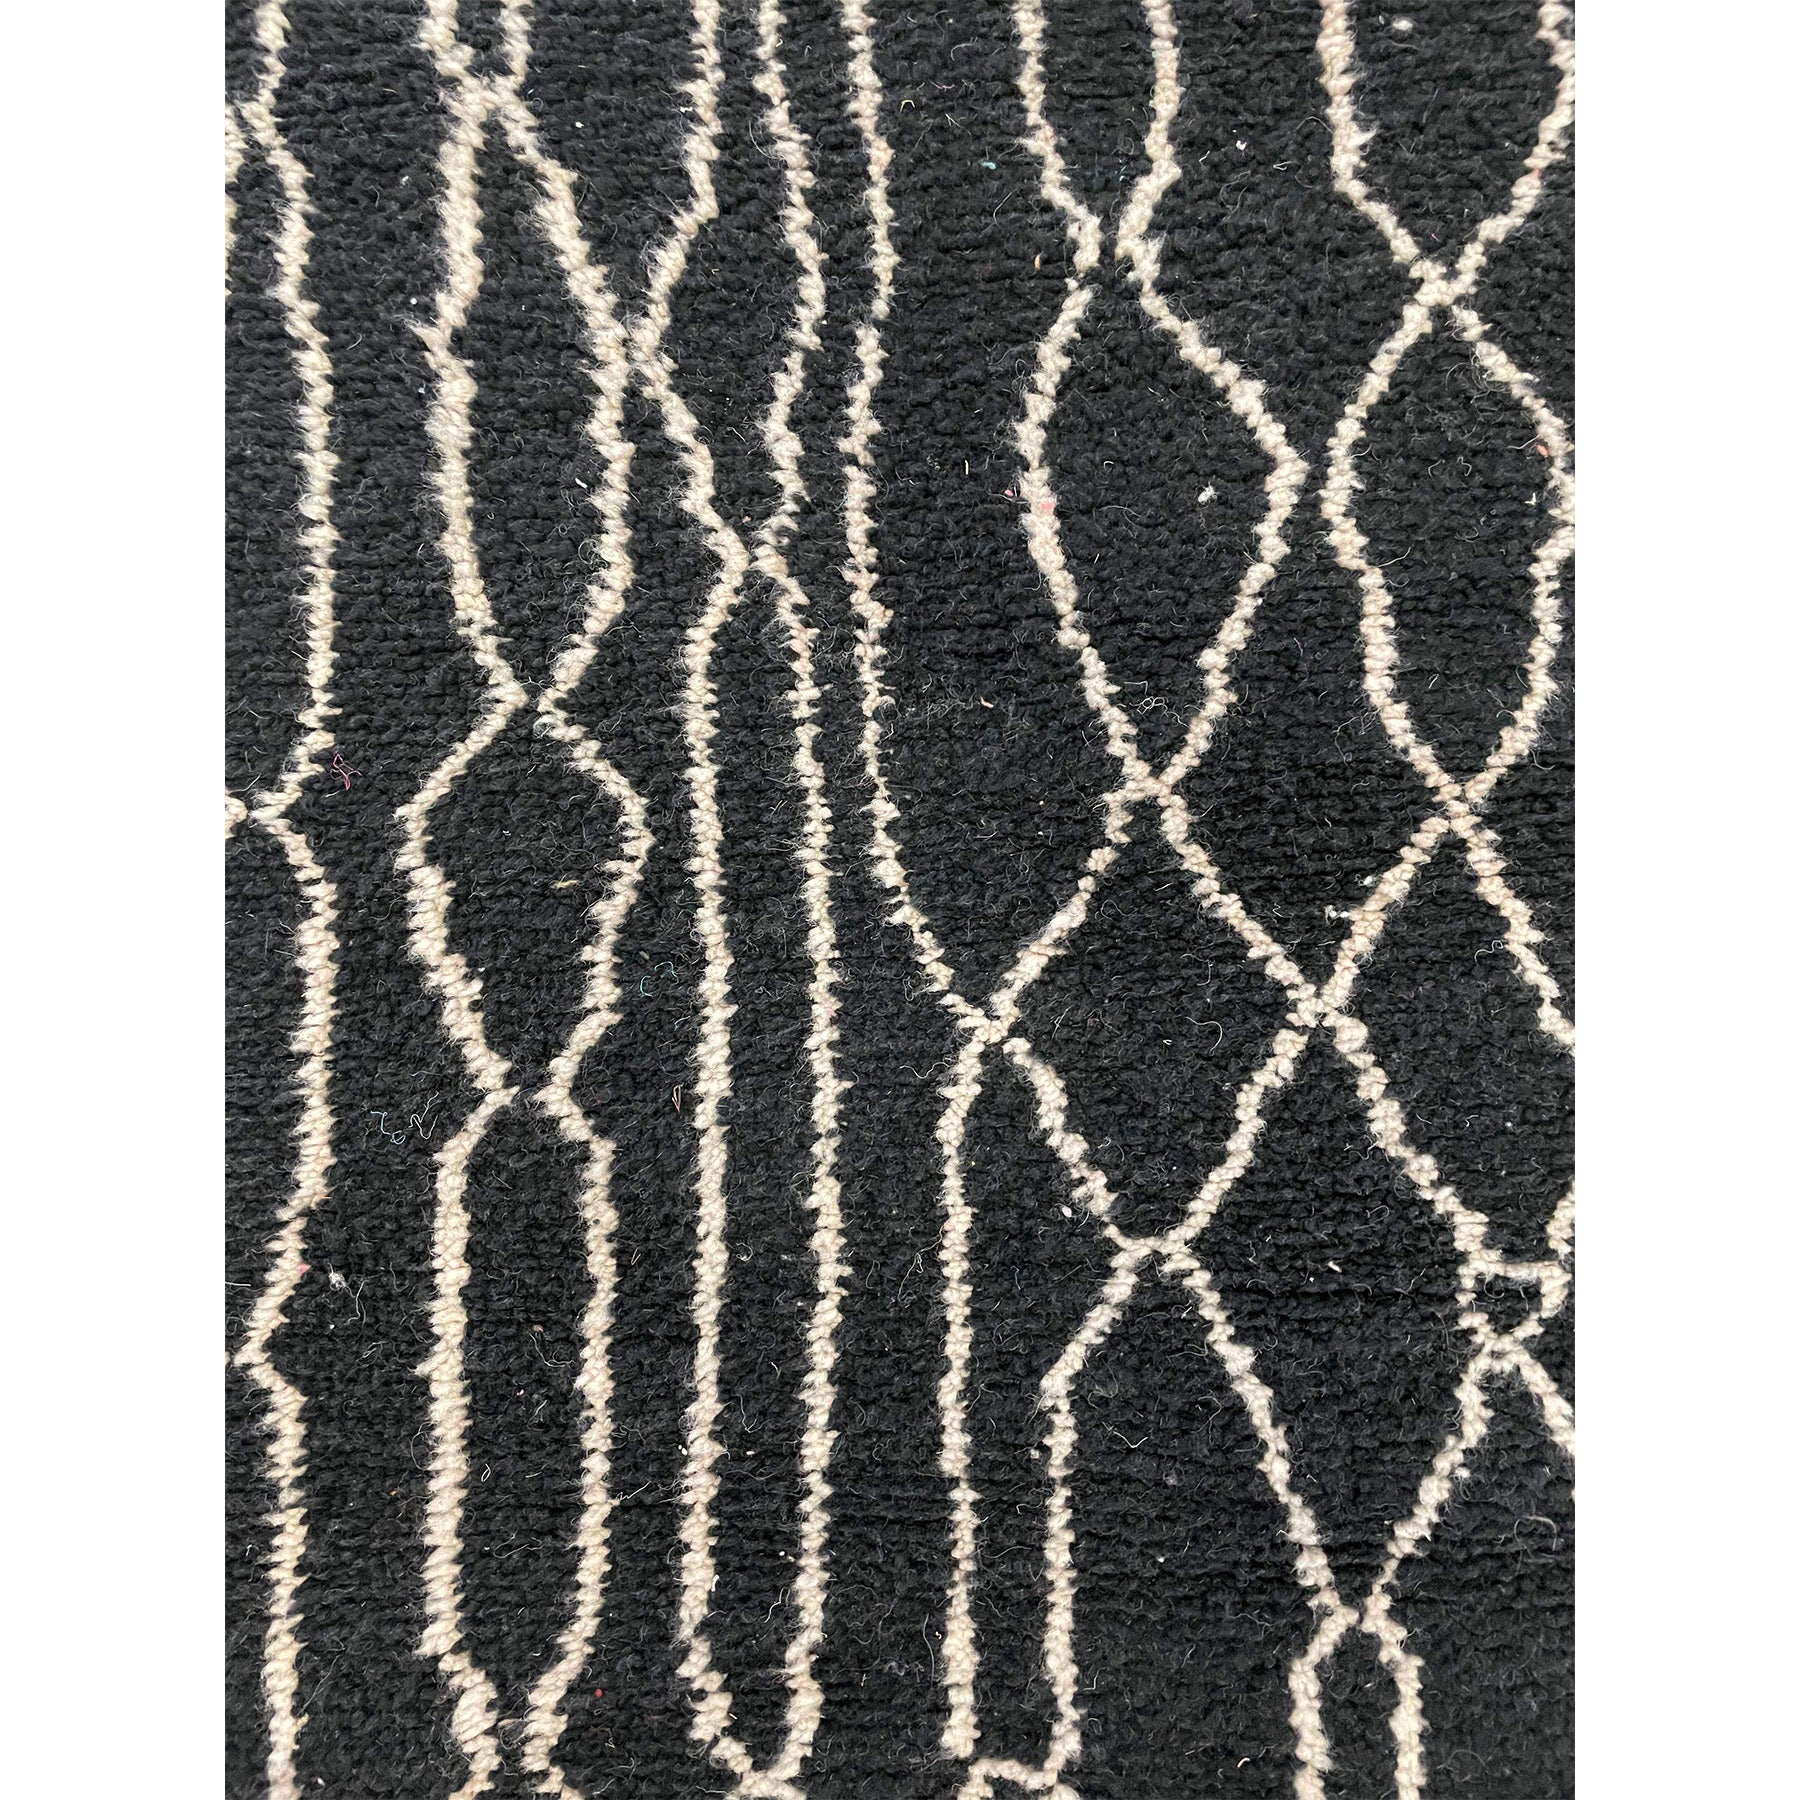 Minimalist handknotted Moroccan rug in white and black - Kantara | Moroccan Rugs